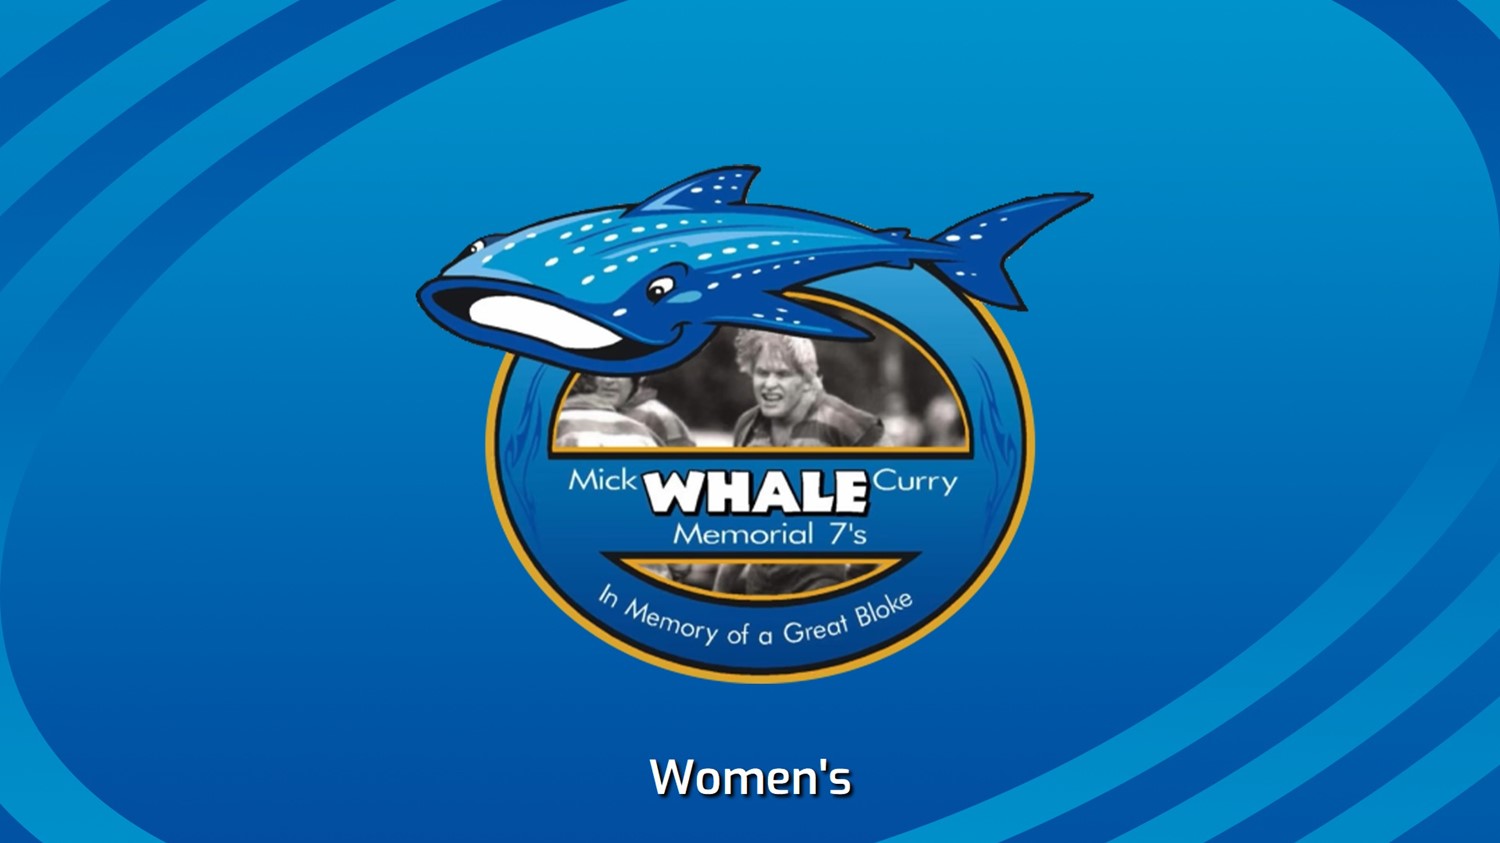 240210-Mick "Whale" Curry Memorial Rugby Sevens Grand Final - Women's - Gordon v Sydney University Minigame Slate Image